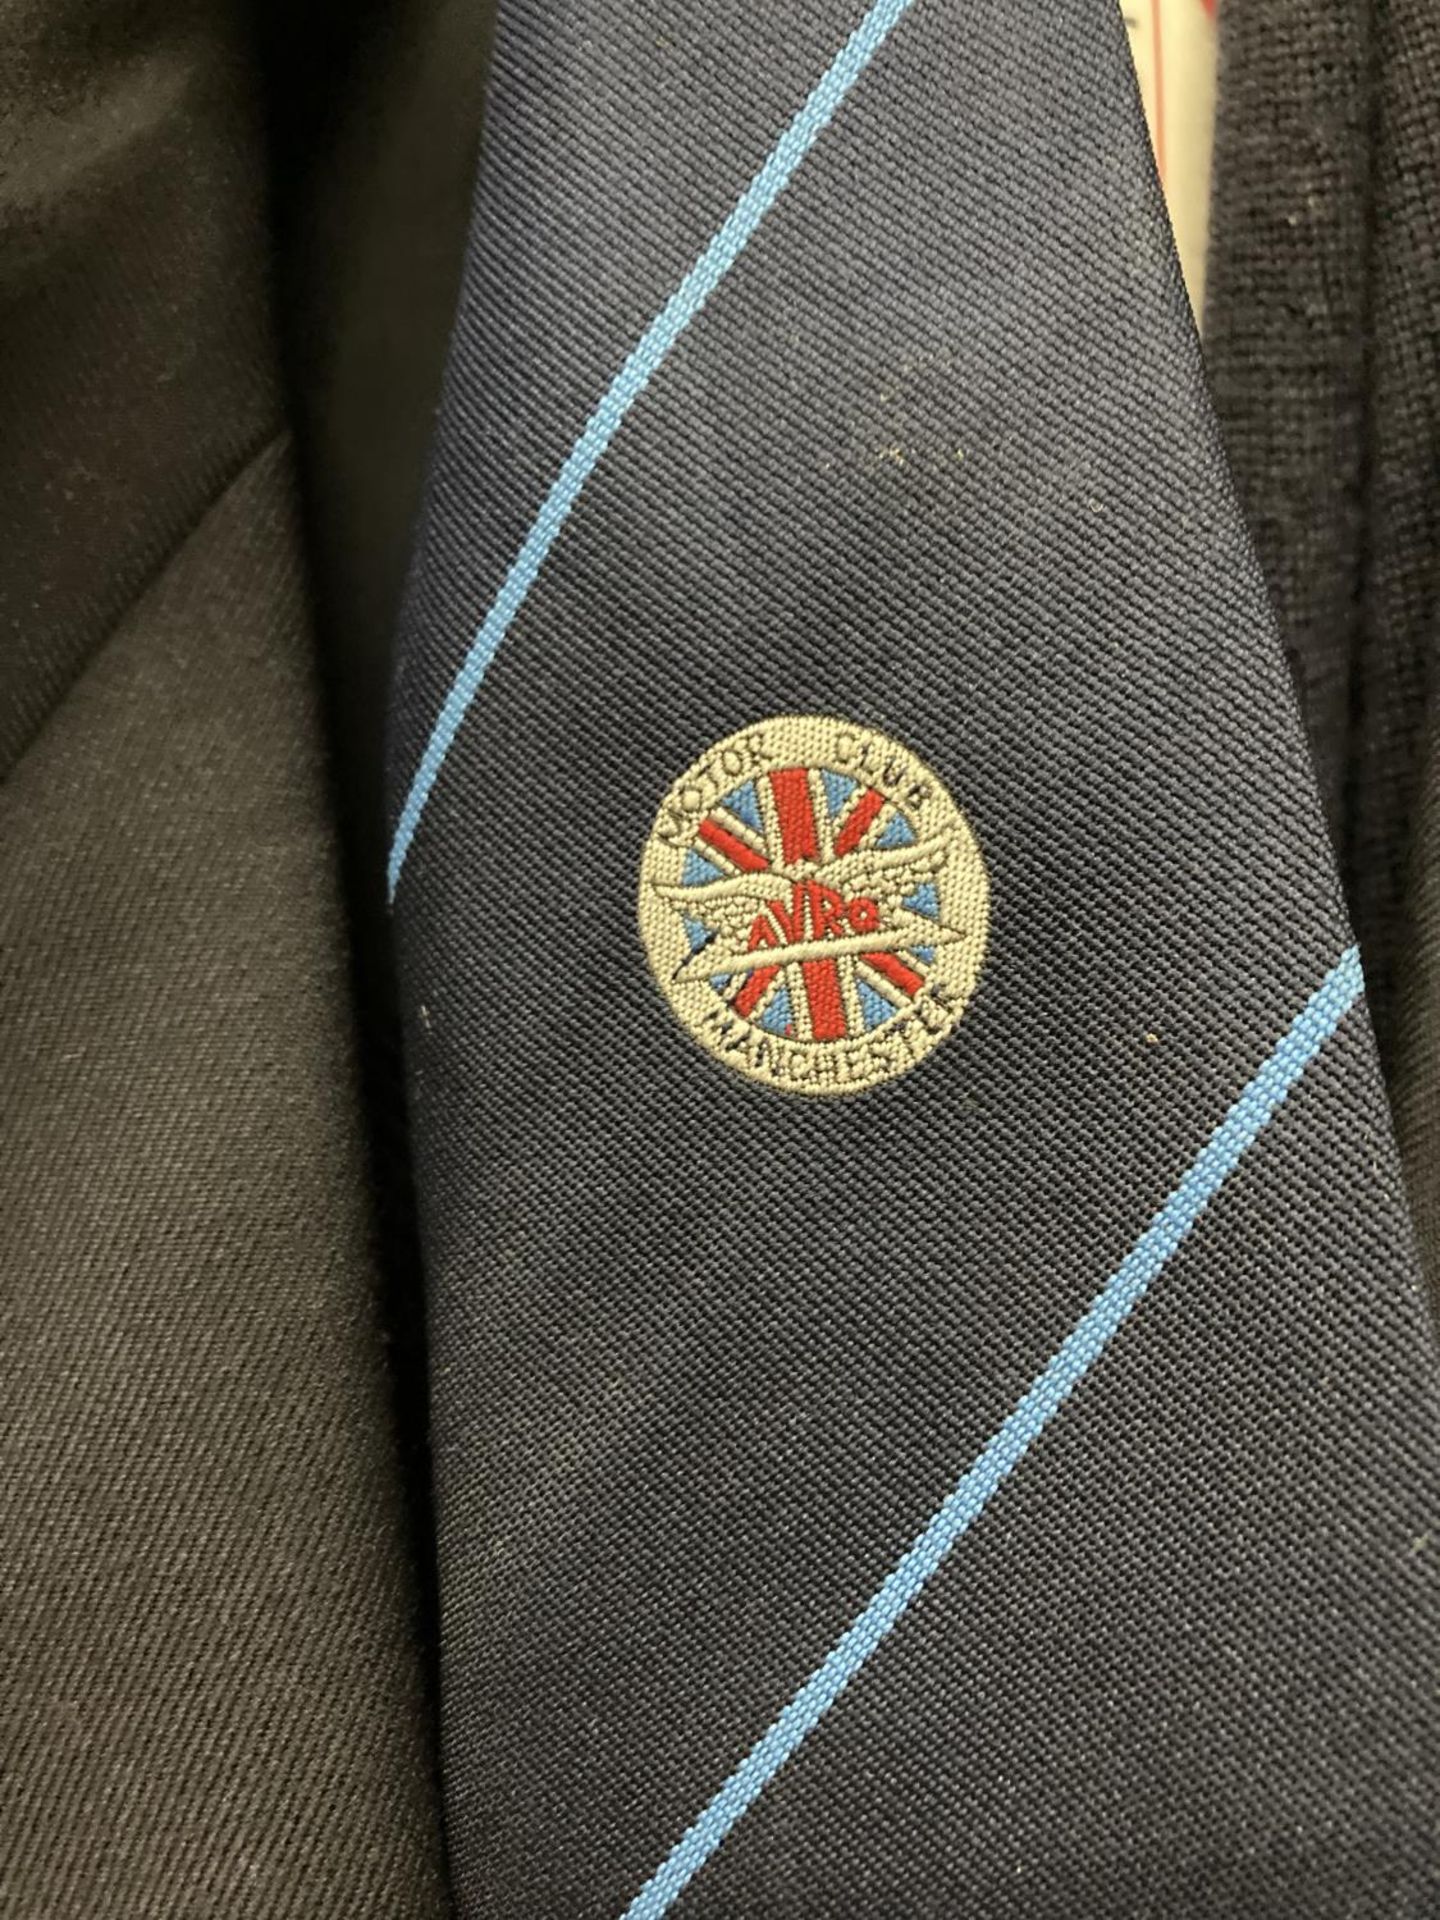 A BRITISH AIRWAYS JACKET, PULLOVER, LANYARD AND TIES - Image 2 of 2